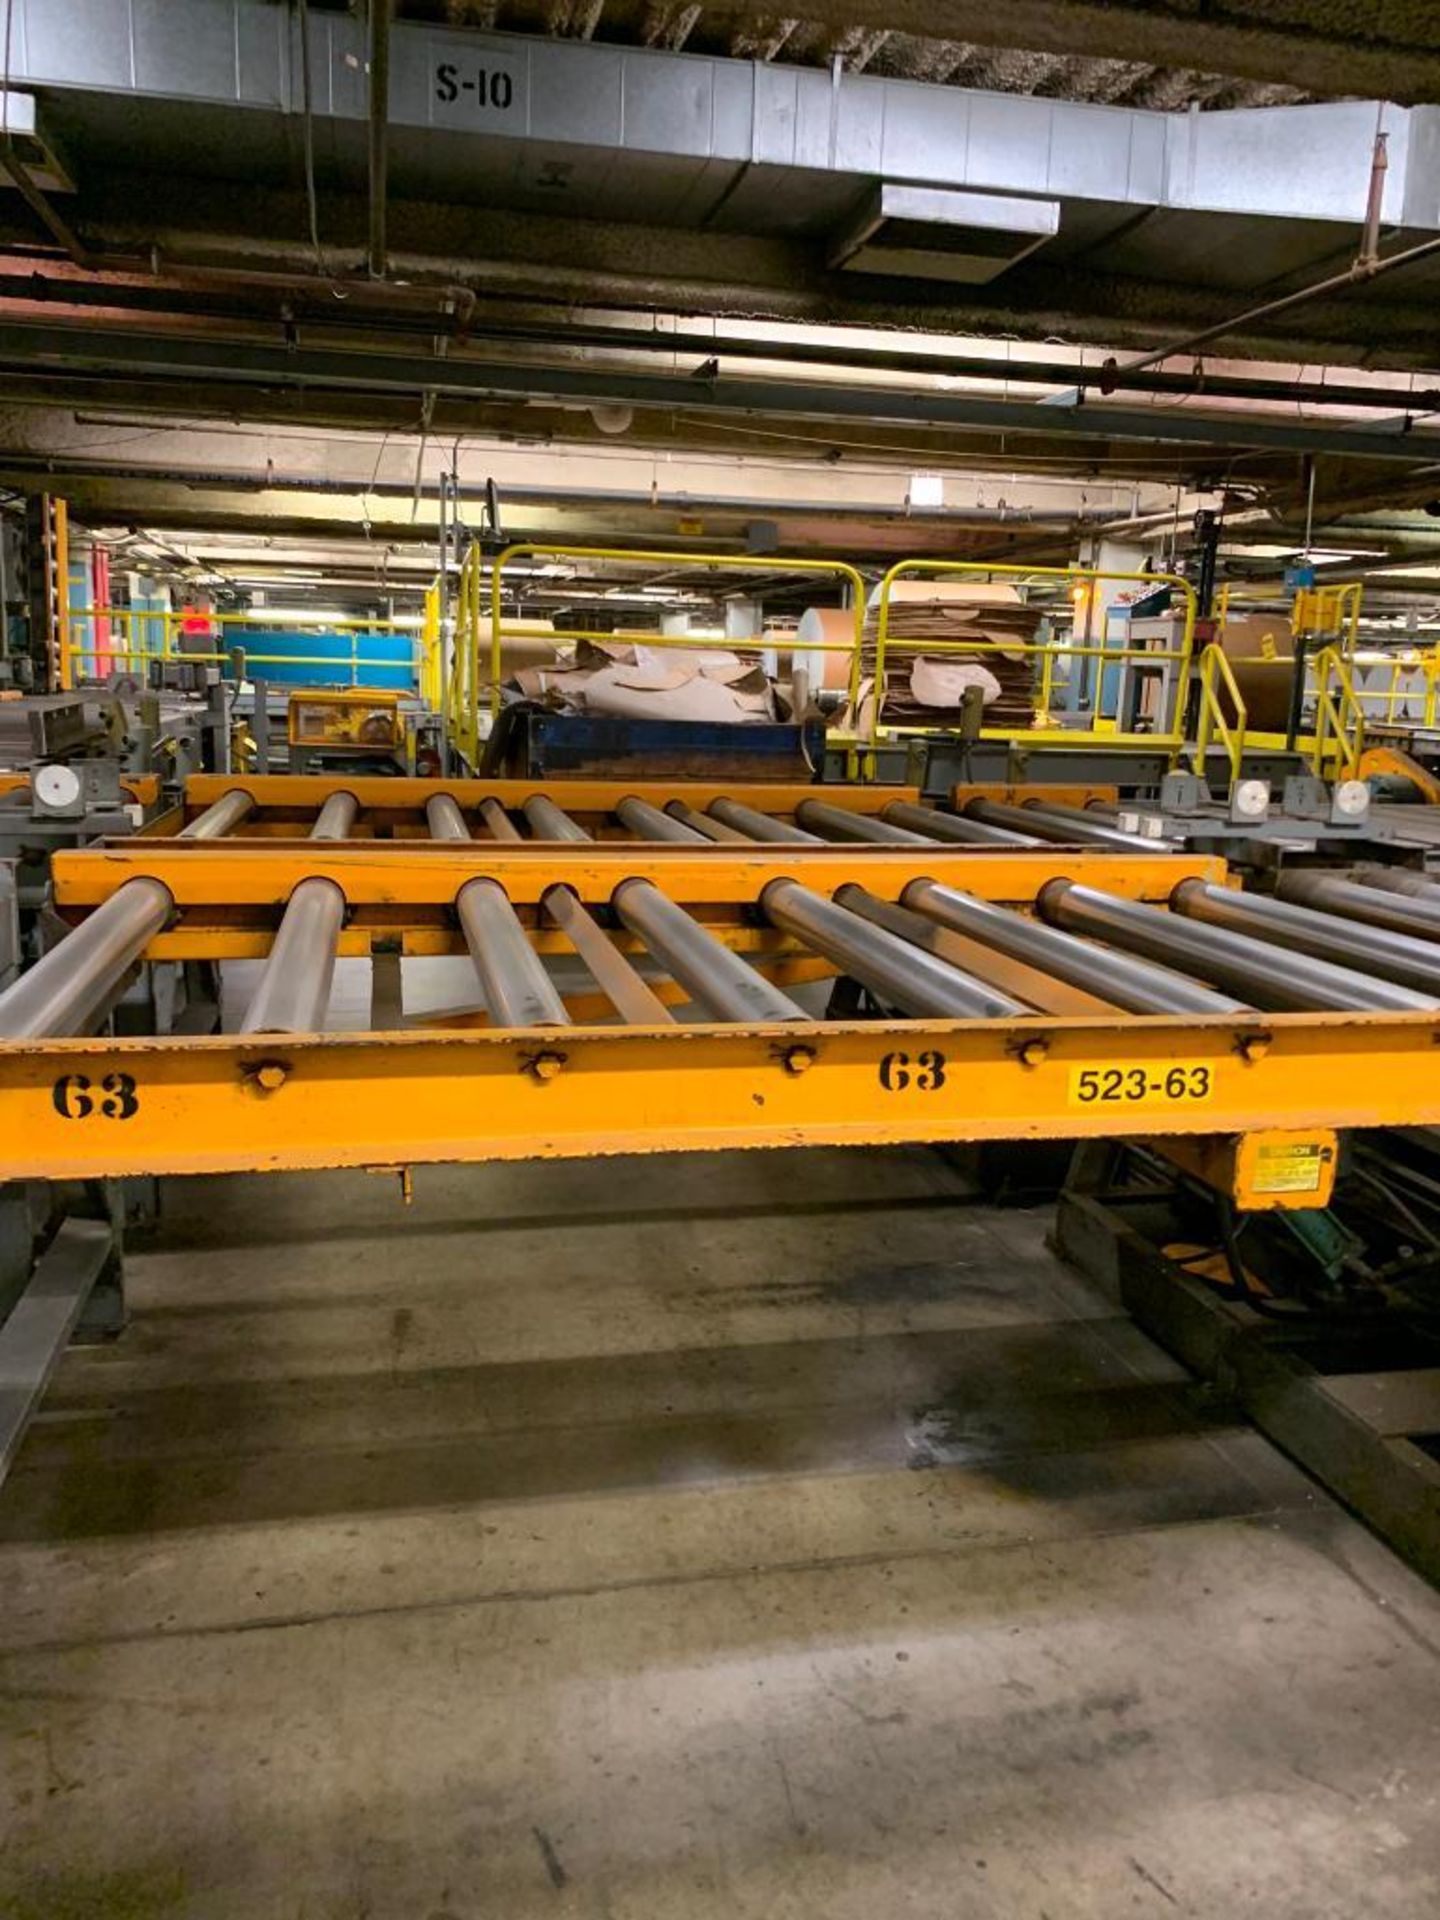 350' of Steel Power Roller/Plate 48" Conveyor, (6) 103" Hydraulic Lift Gate Sections, Photo Switches - Image 5 of 18